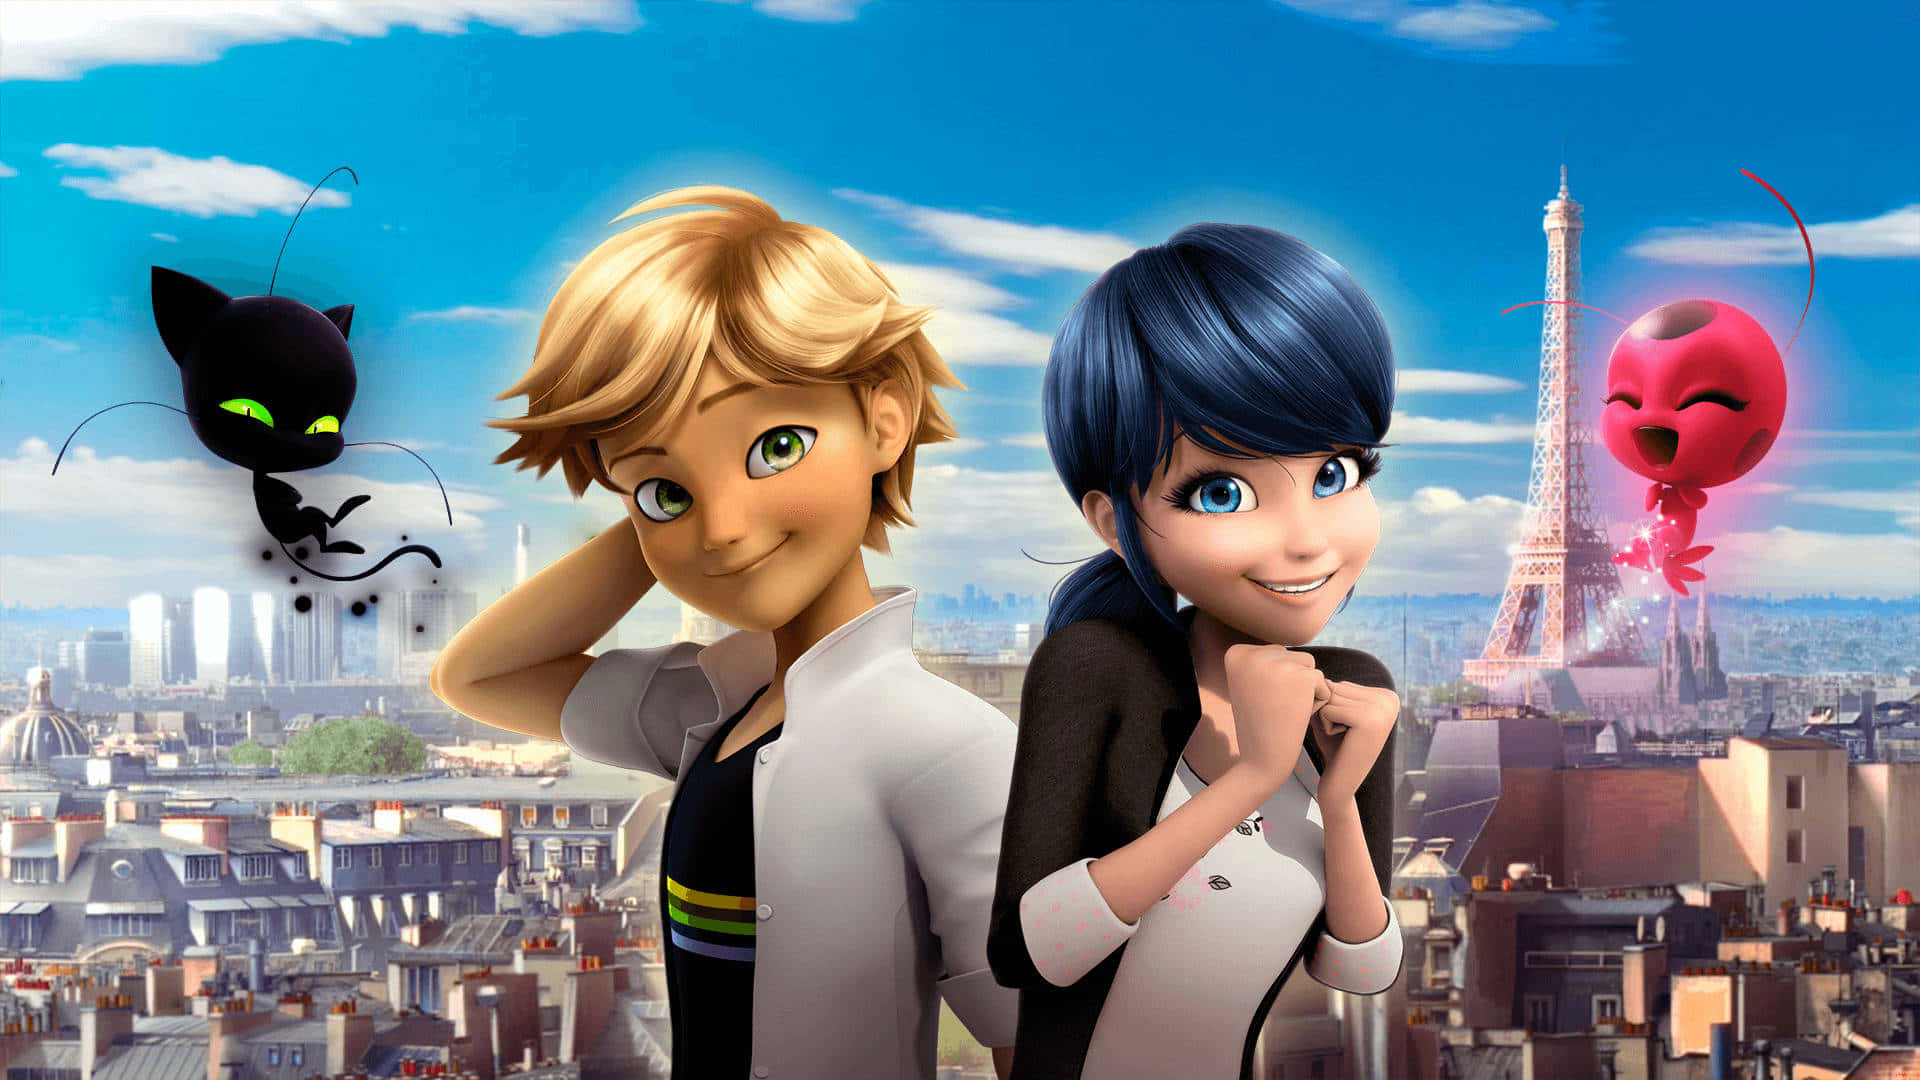 "Adrien Agreste From Miraculous Ladybug - Ready to Fend Off the Next Evil". Wallpaper